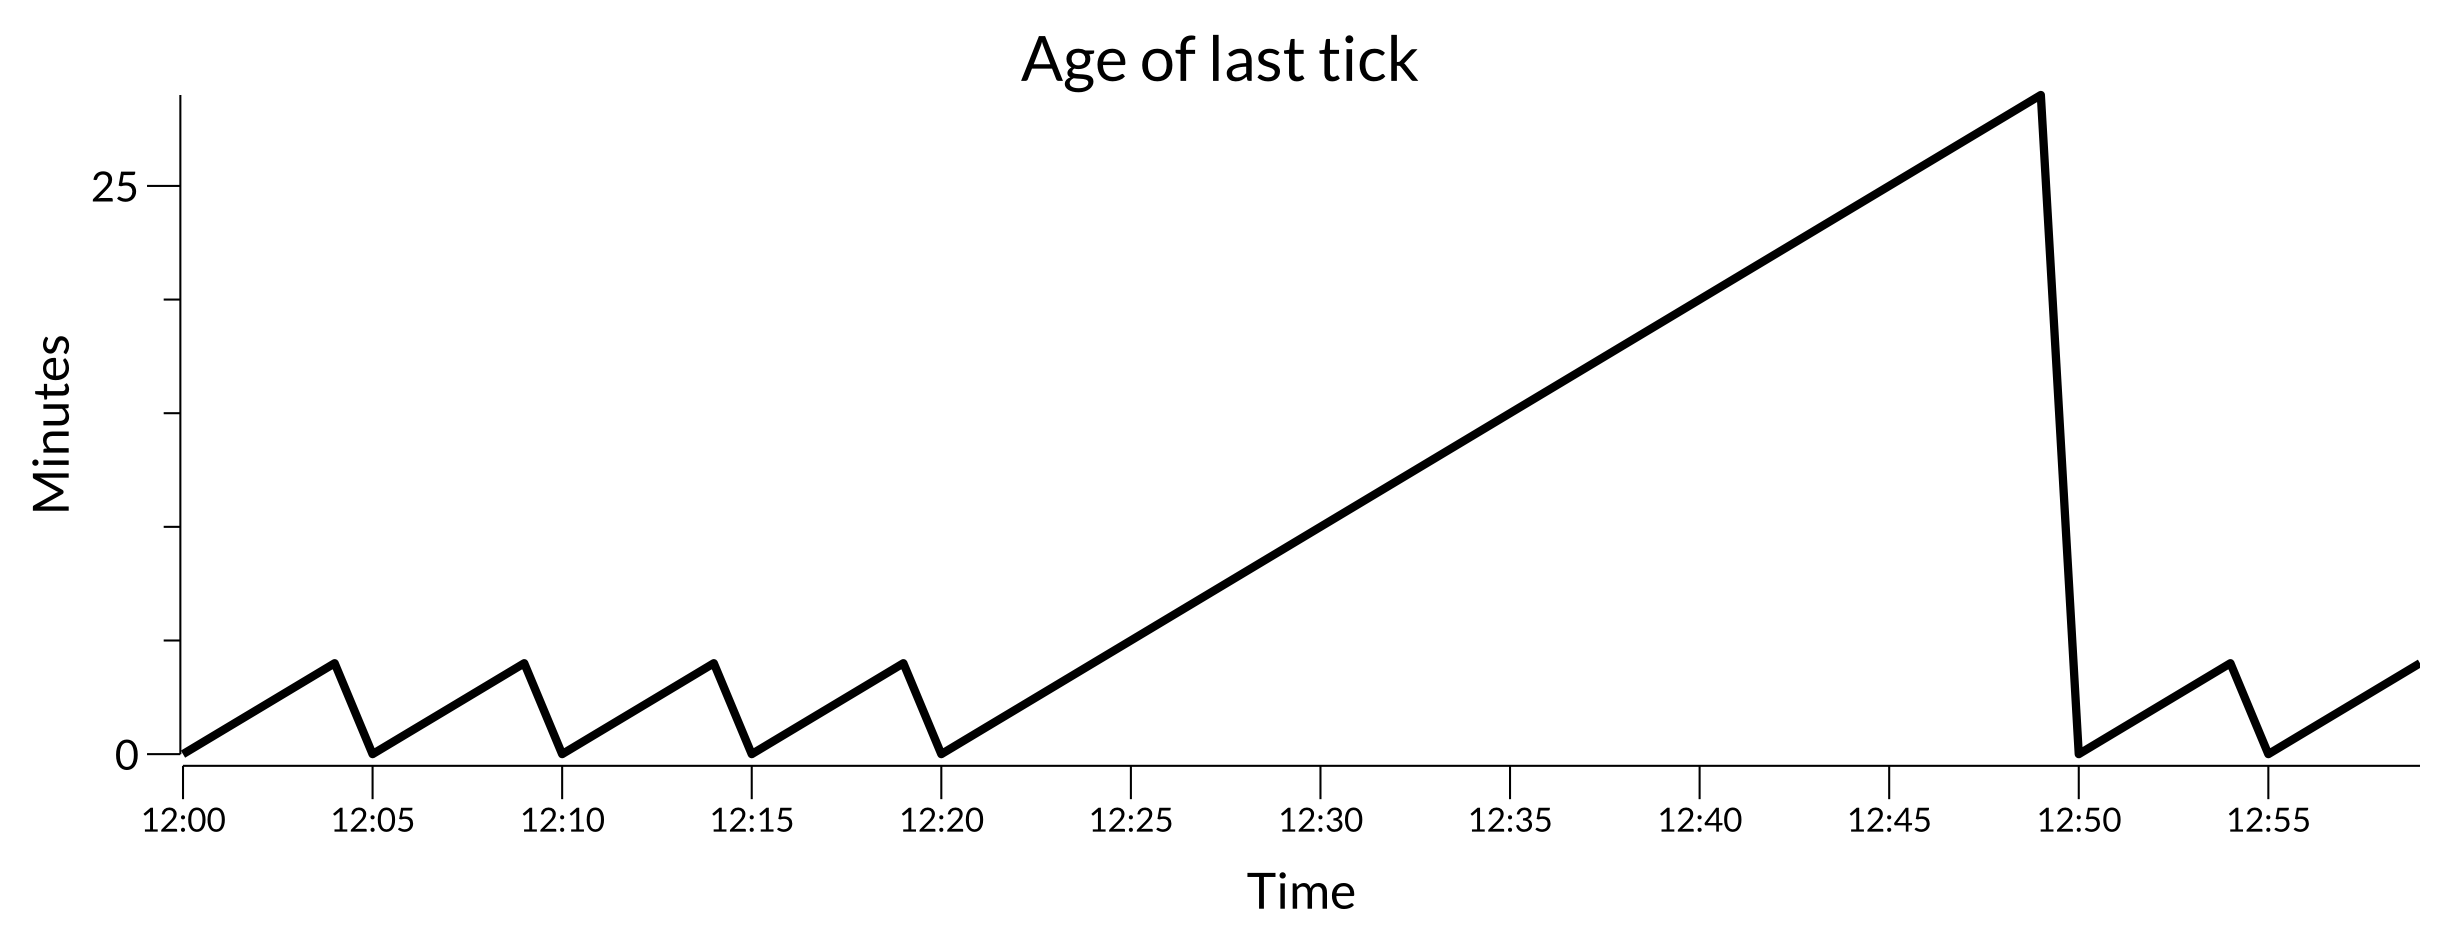 A sample time series line plot of age last tick, similar to the previous, but at 12:20 the line continues up to beyond 25 minutes, dropping back to 0 at 12:50.